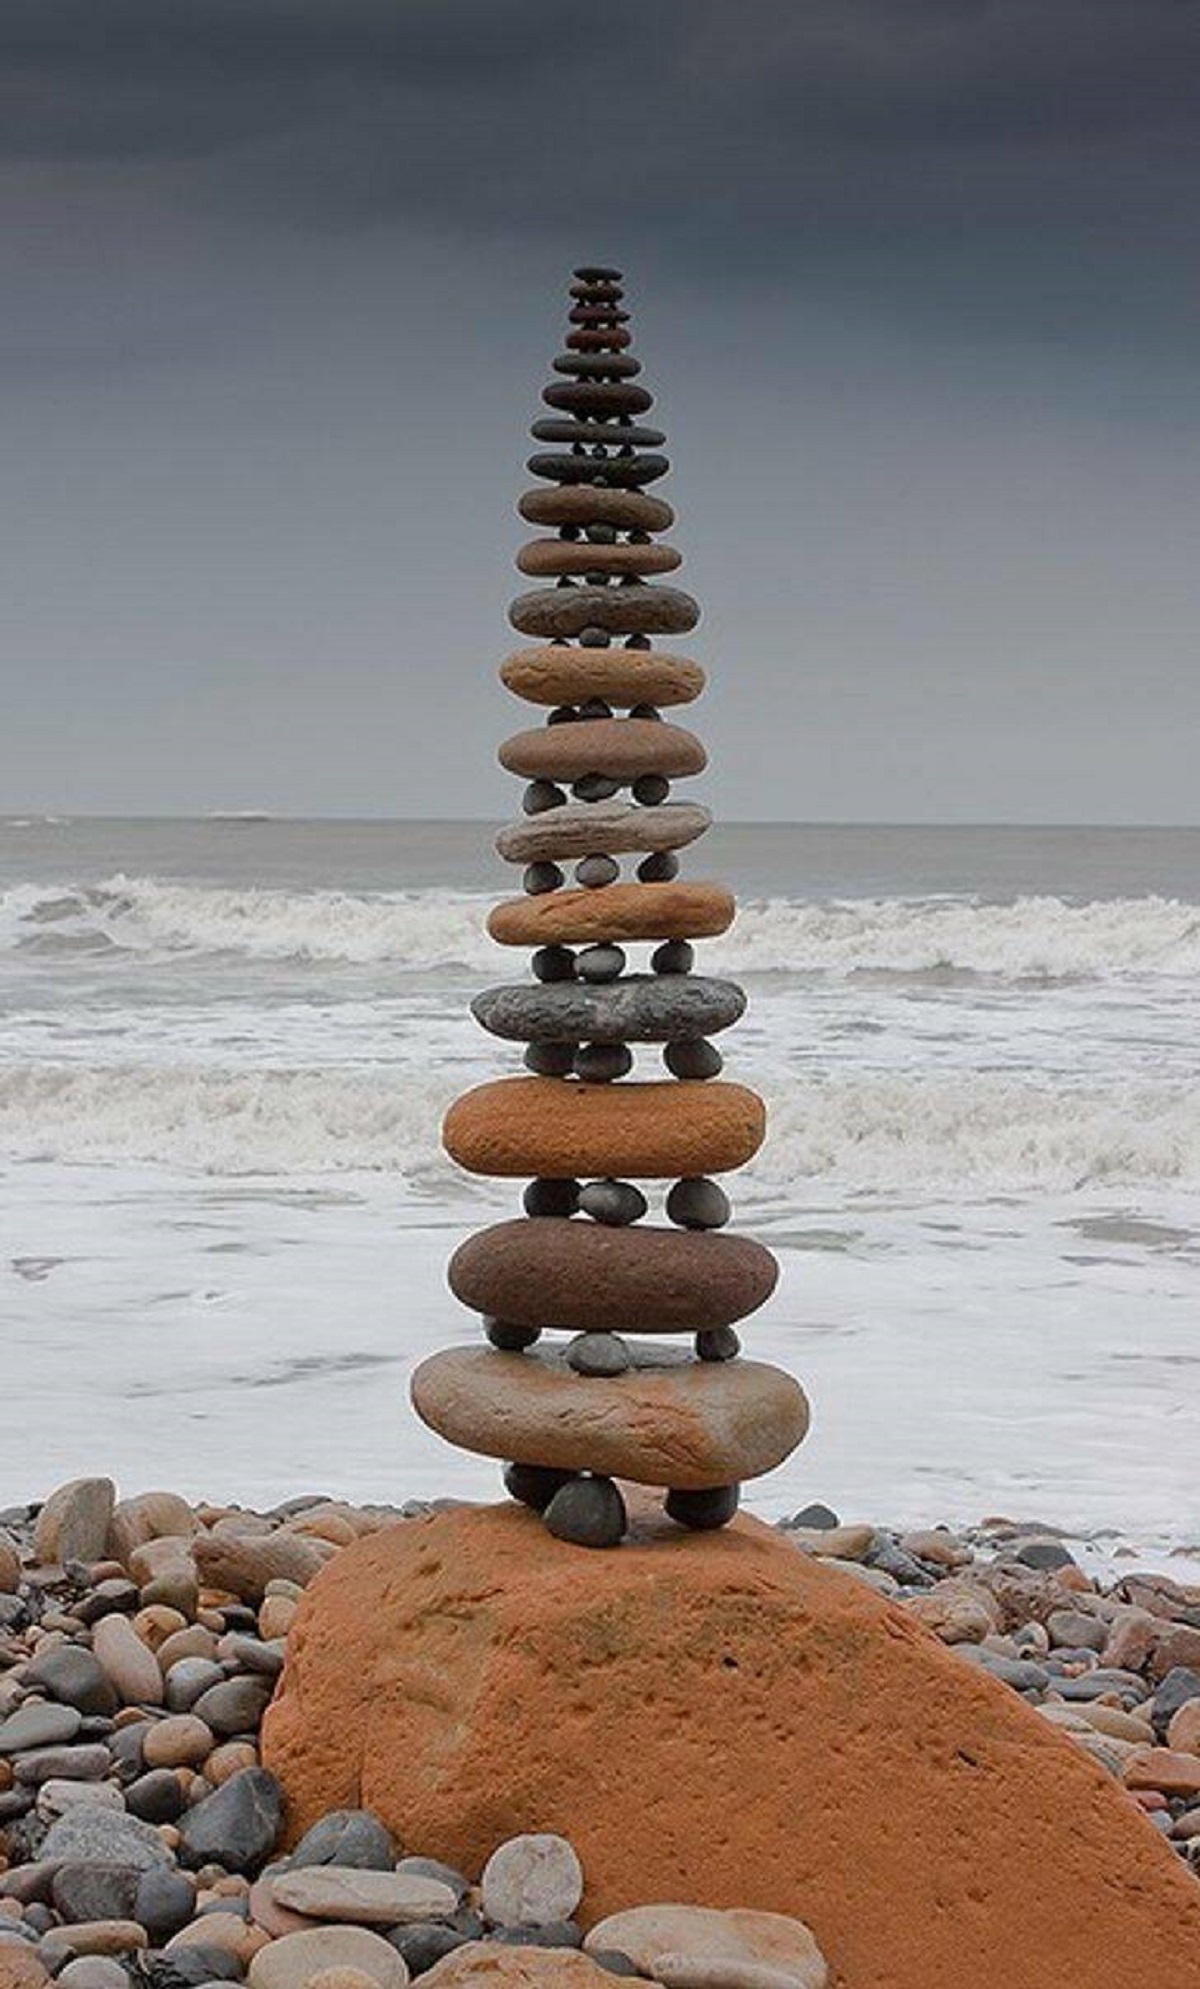 A rock tower balanced on little rocks that creates the illusion of a stairway